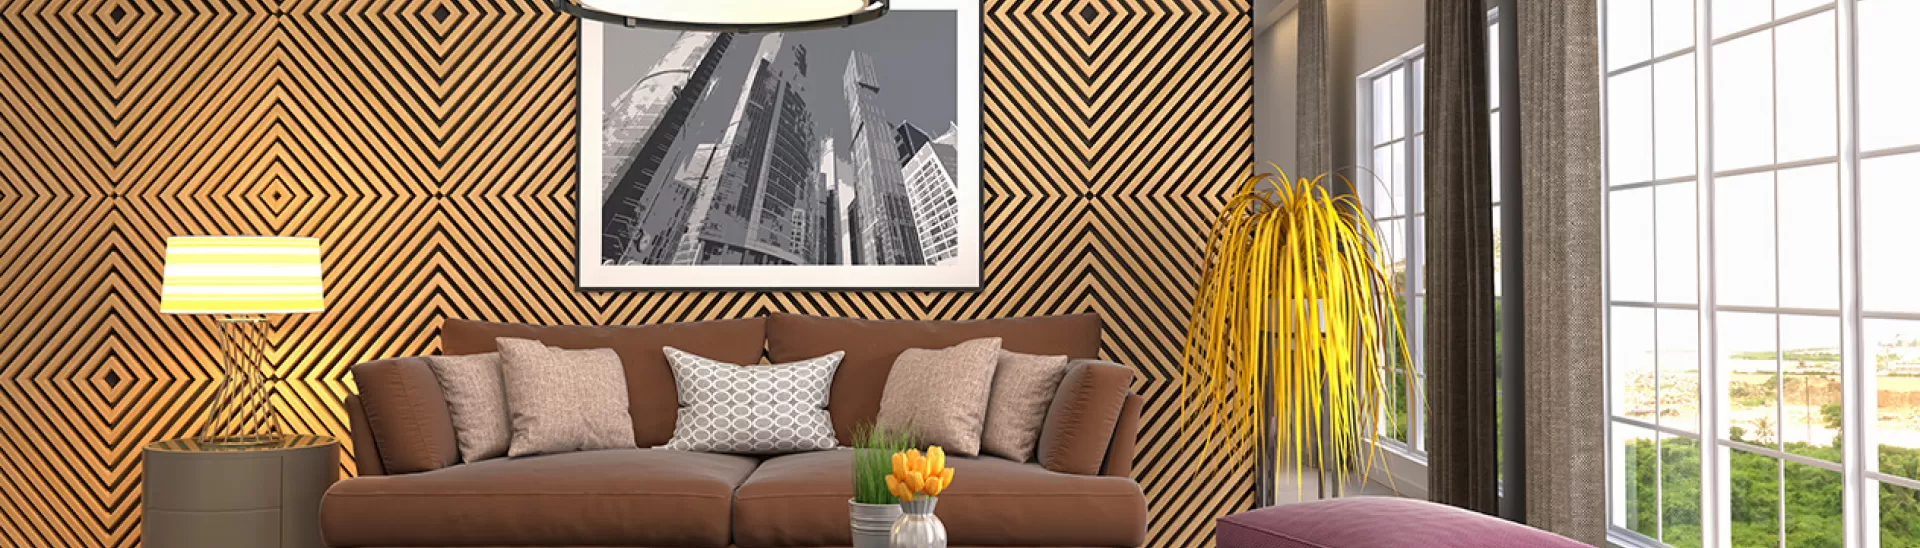 11 Surprising Ideas for Styling With Textured Wallpaper - Feathr™